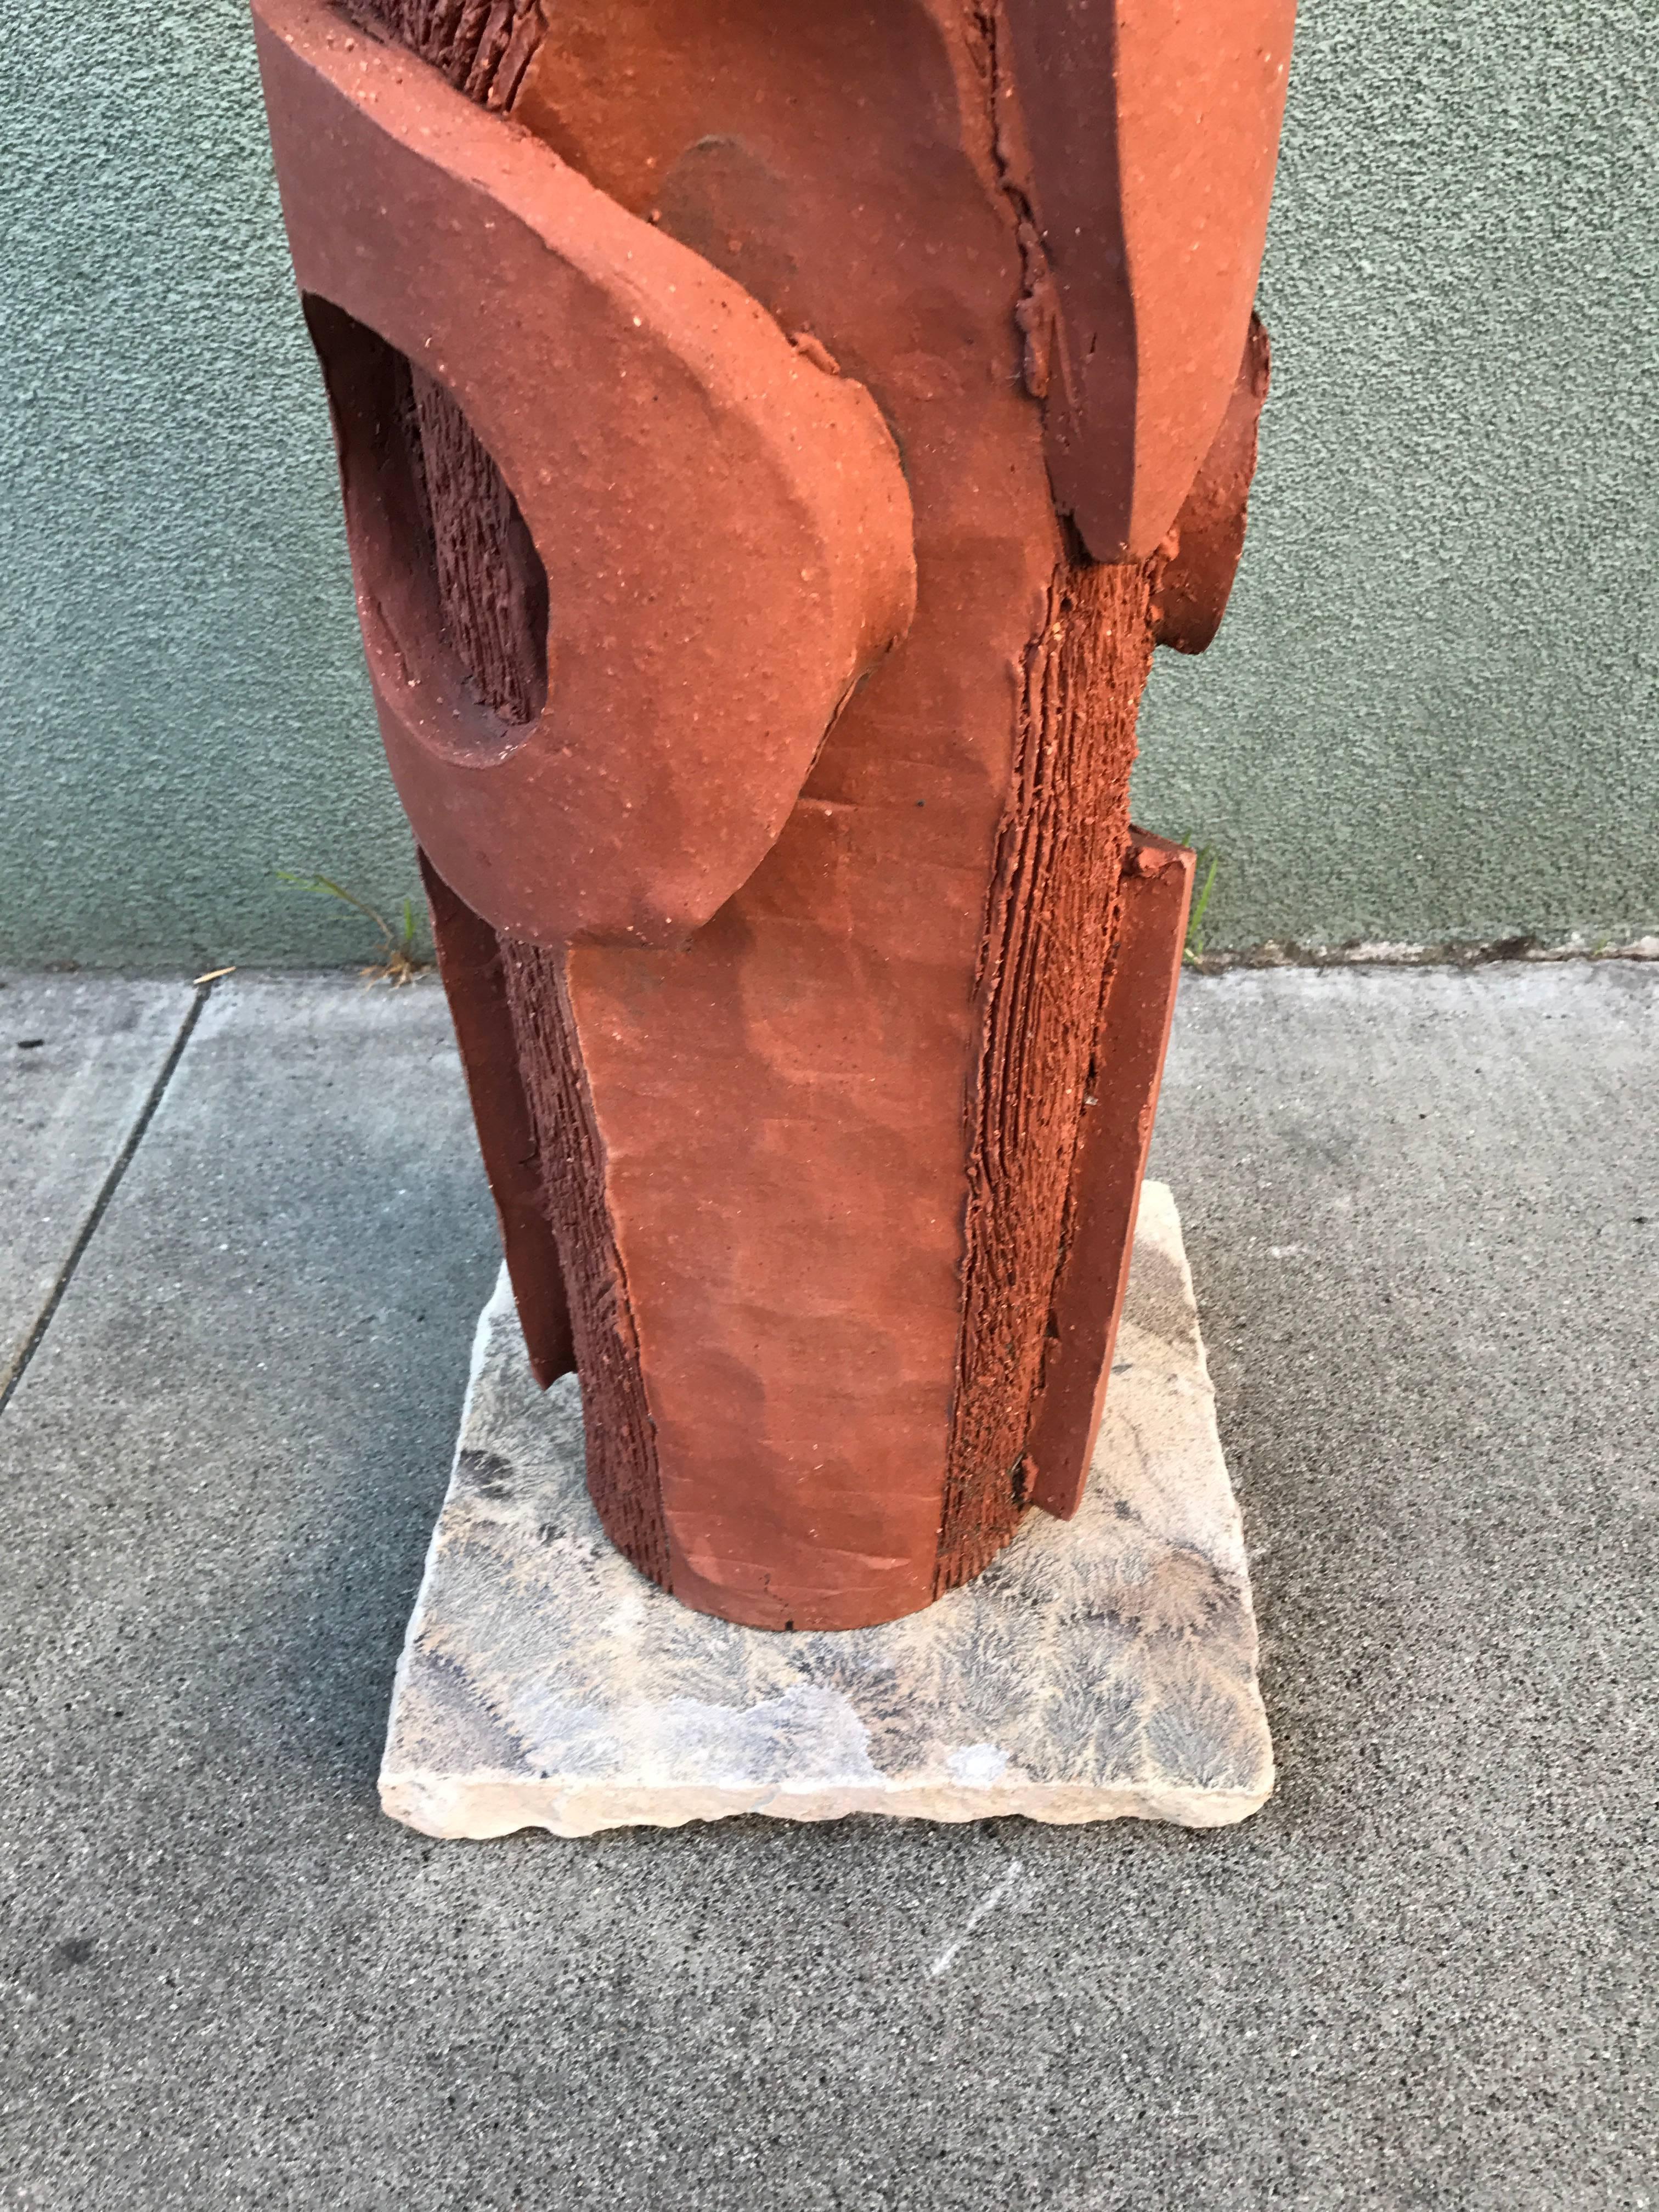 Large 1970s, Bay Area Ceramic Abstract or Bruttalist Sculpture TOTEM #1 2